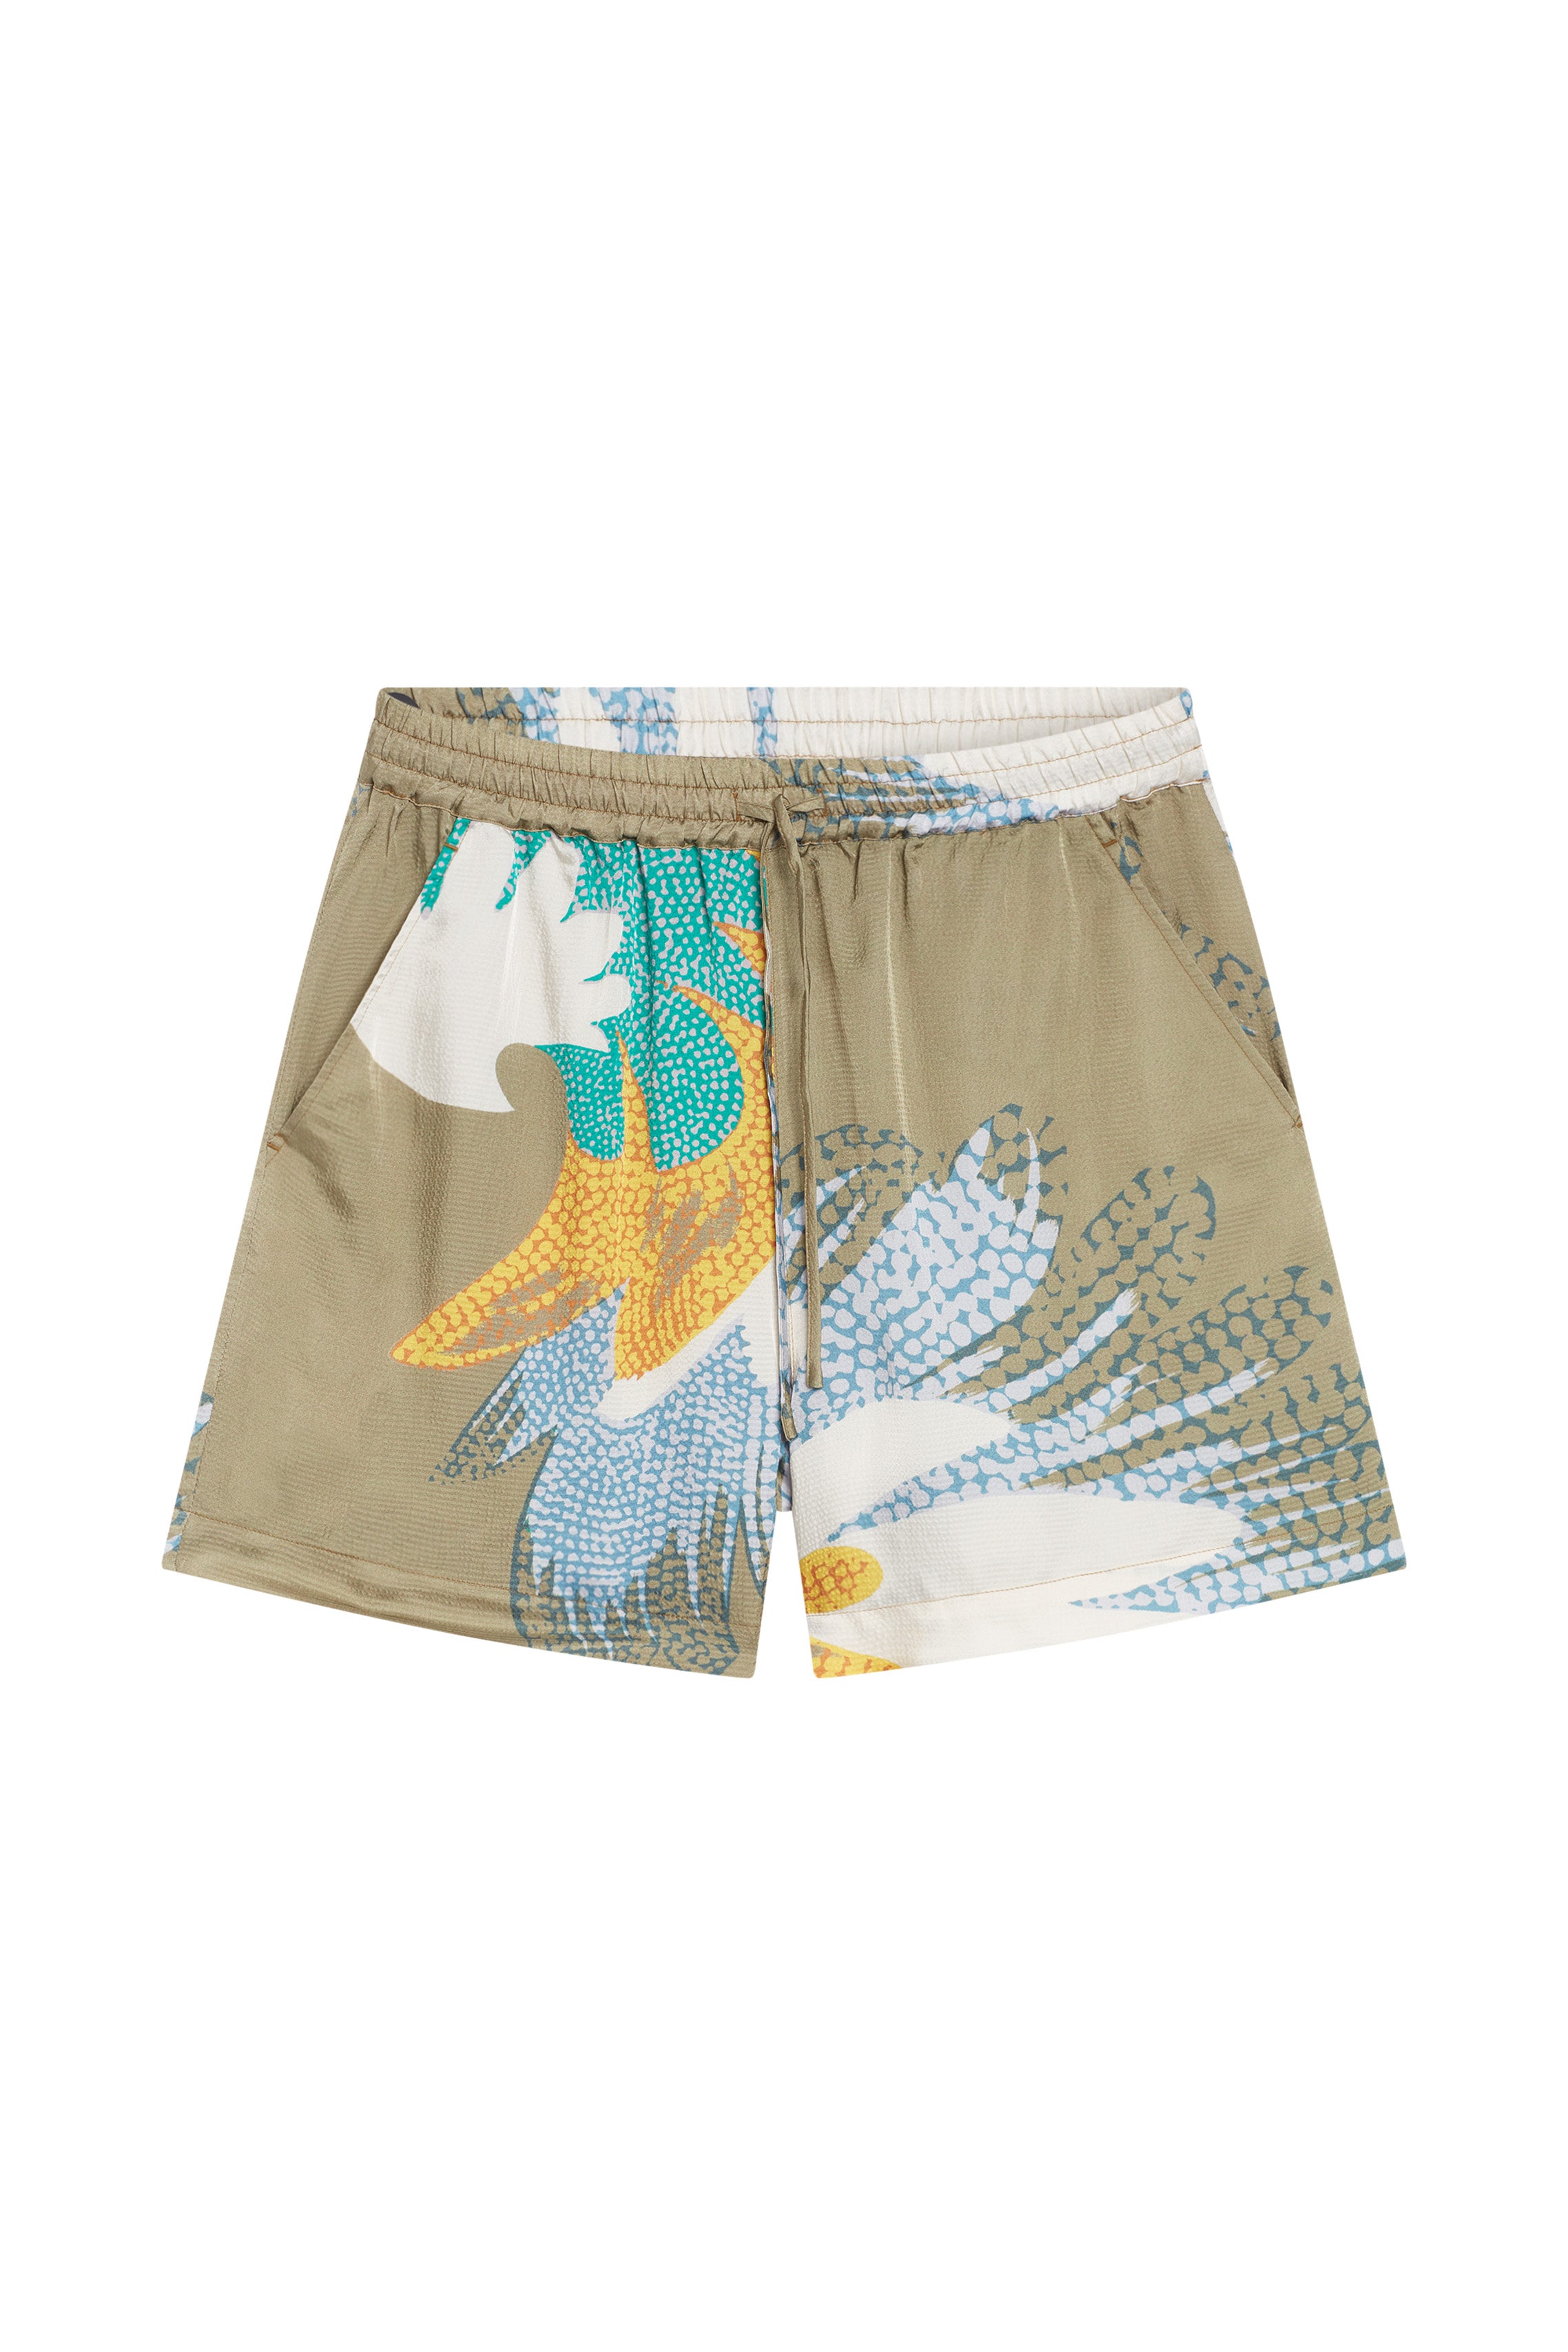 These Fluid Shorts from Closed are crafted from a lightweight and breathable viscose fabric, offering a structured surface and a unique flower print.